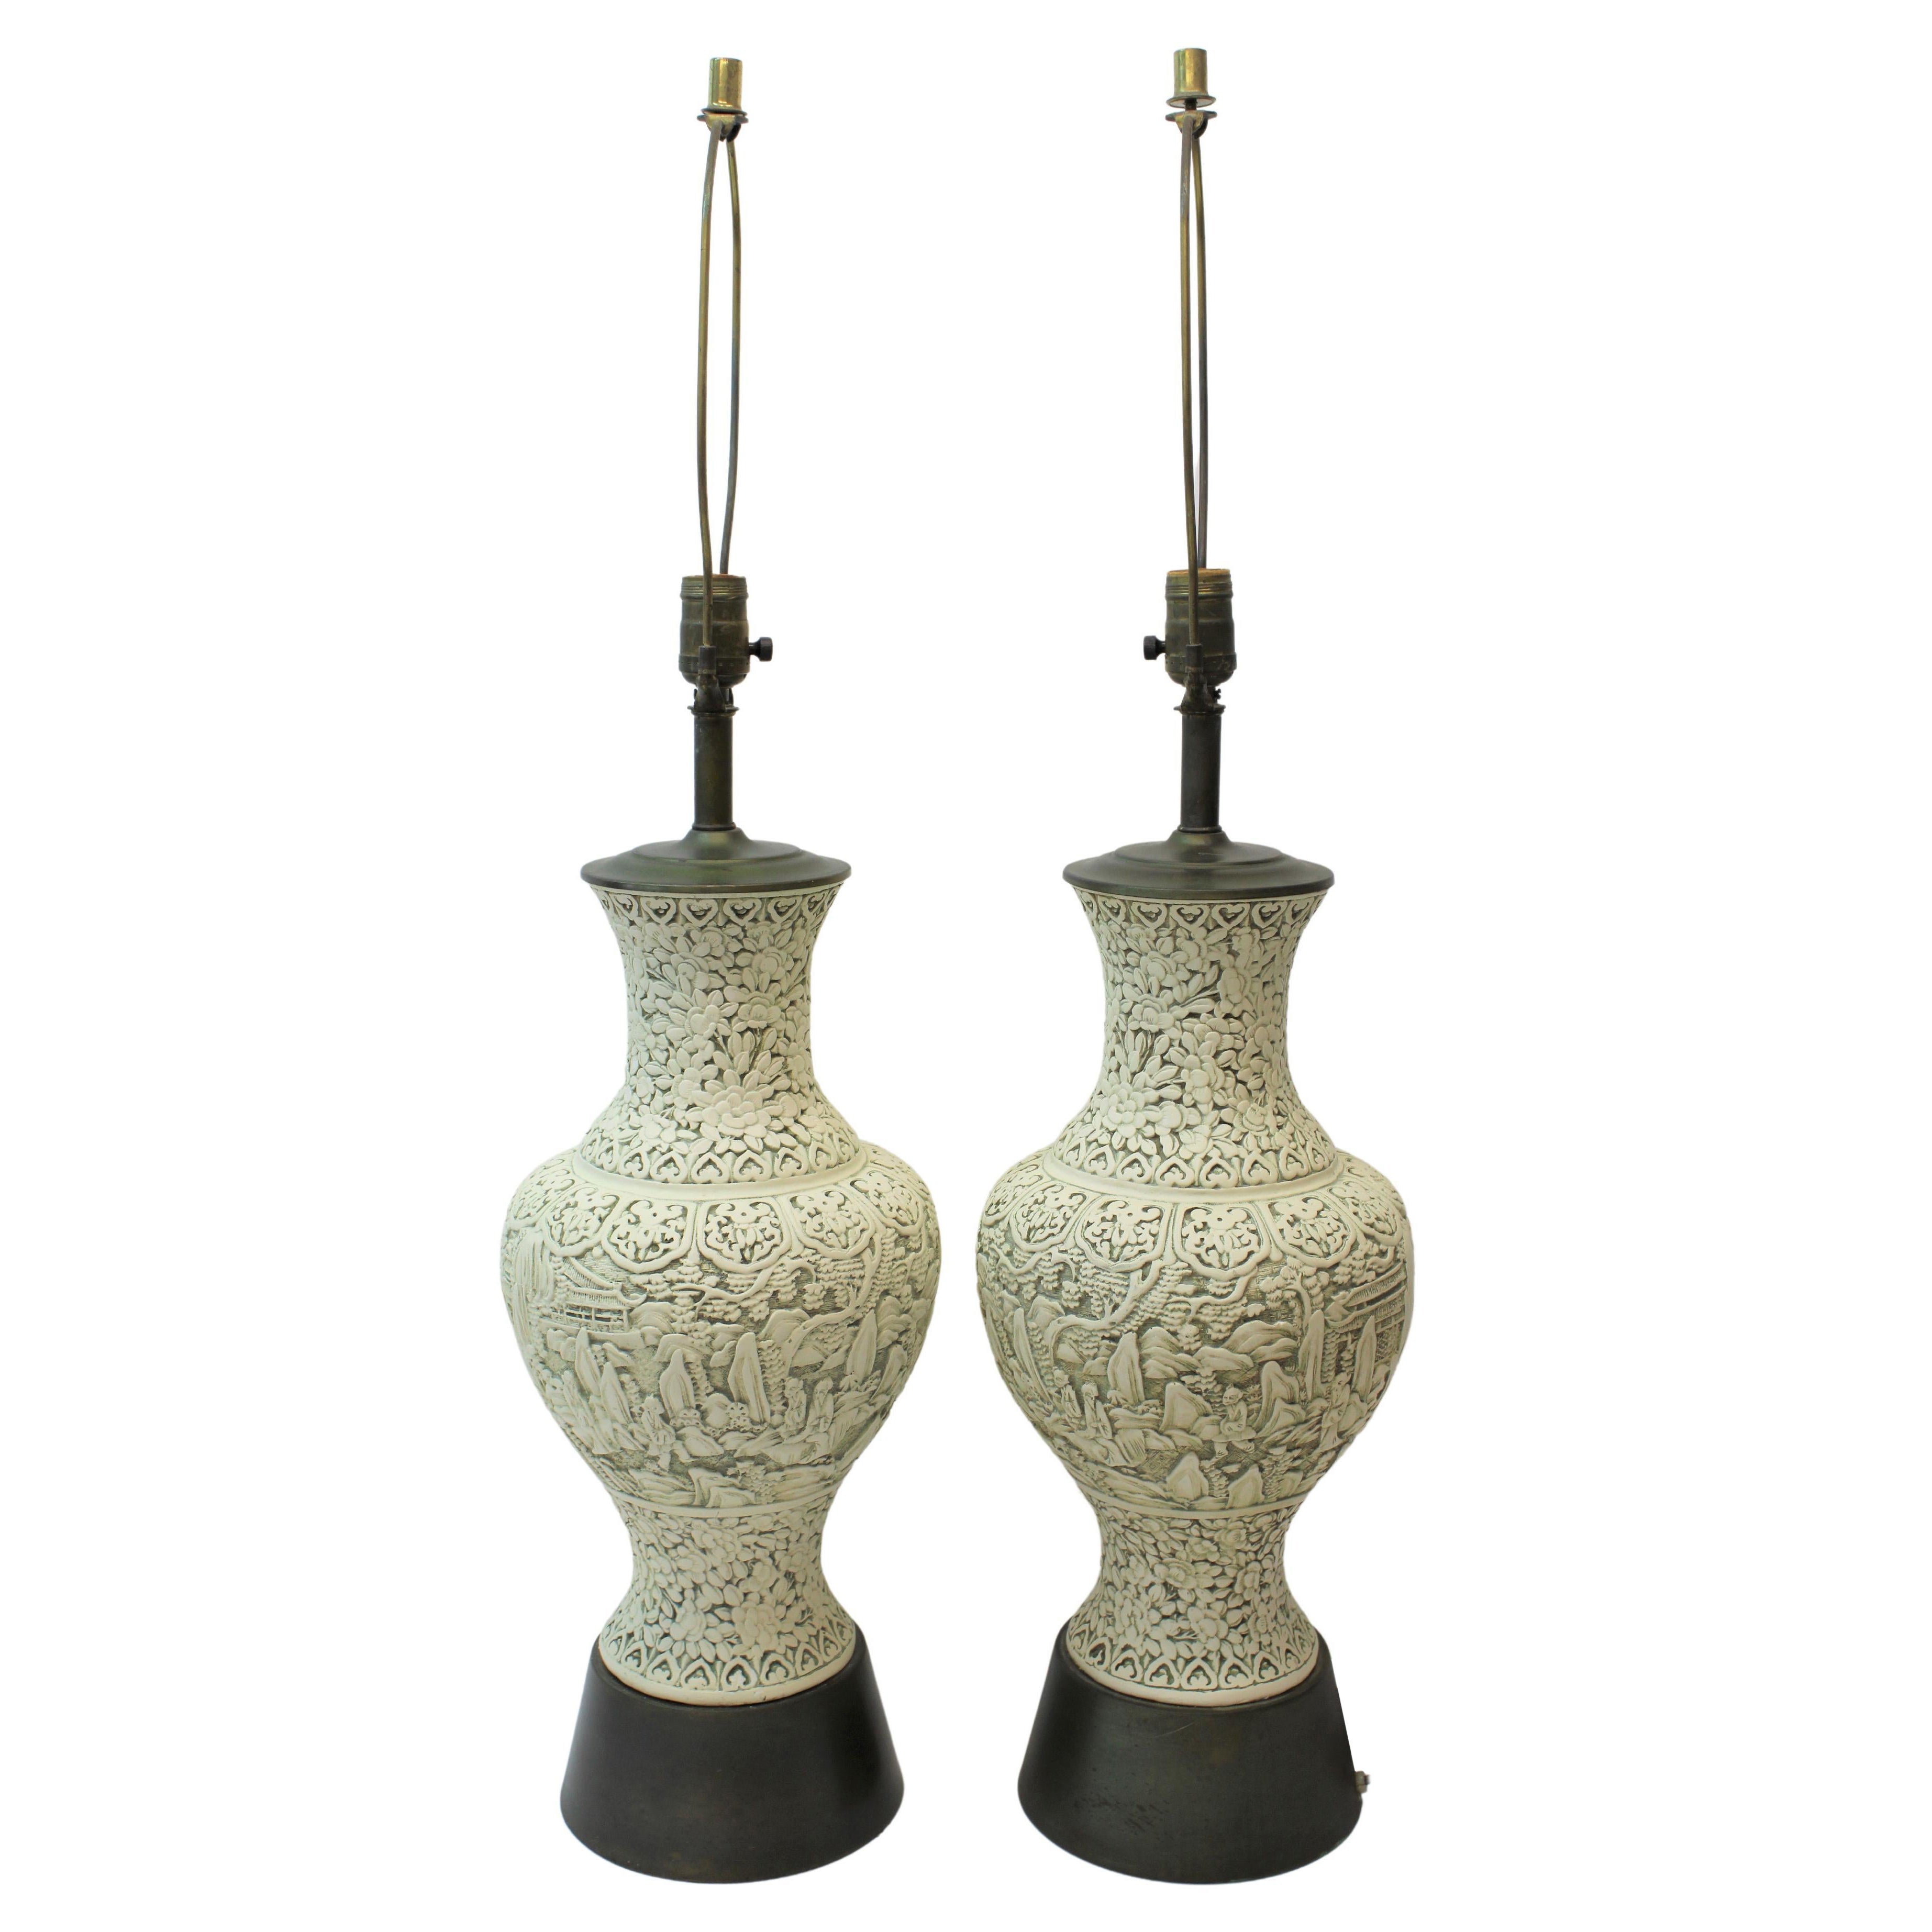 Hand Painted Asian Porcelain Lamps